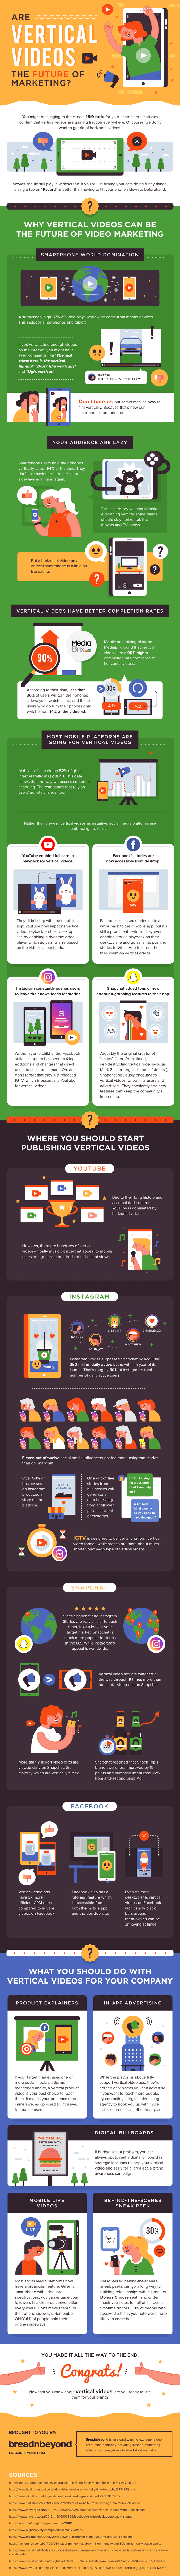 Discover, why vertical videos are gaining popularity, why digital marketers should start joining the bandwagon, who the key players behind vertical videos’ rise, how to use this trend to leverage your marketing strategy and much more in this infographic titled 'The Ultimate Guide to Vertical Videos for Social Media Marketing'